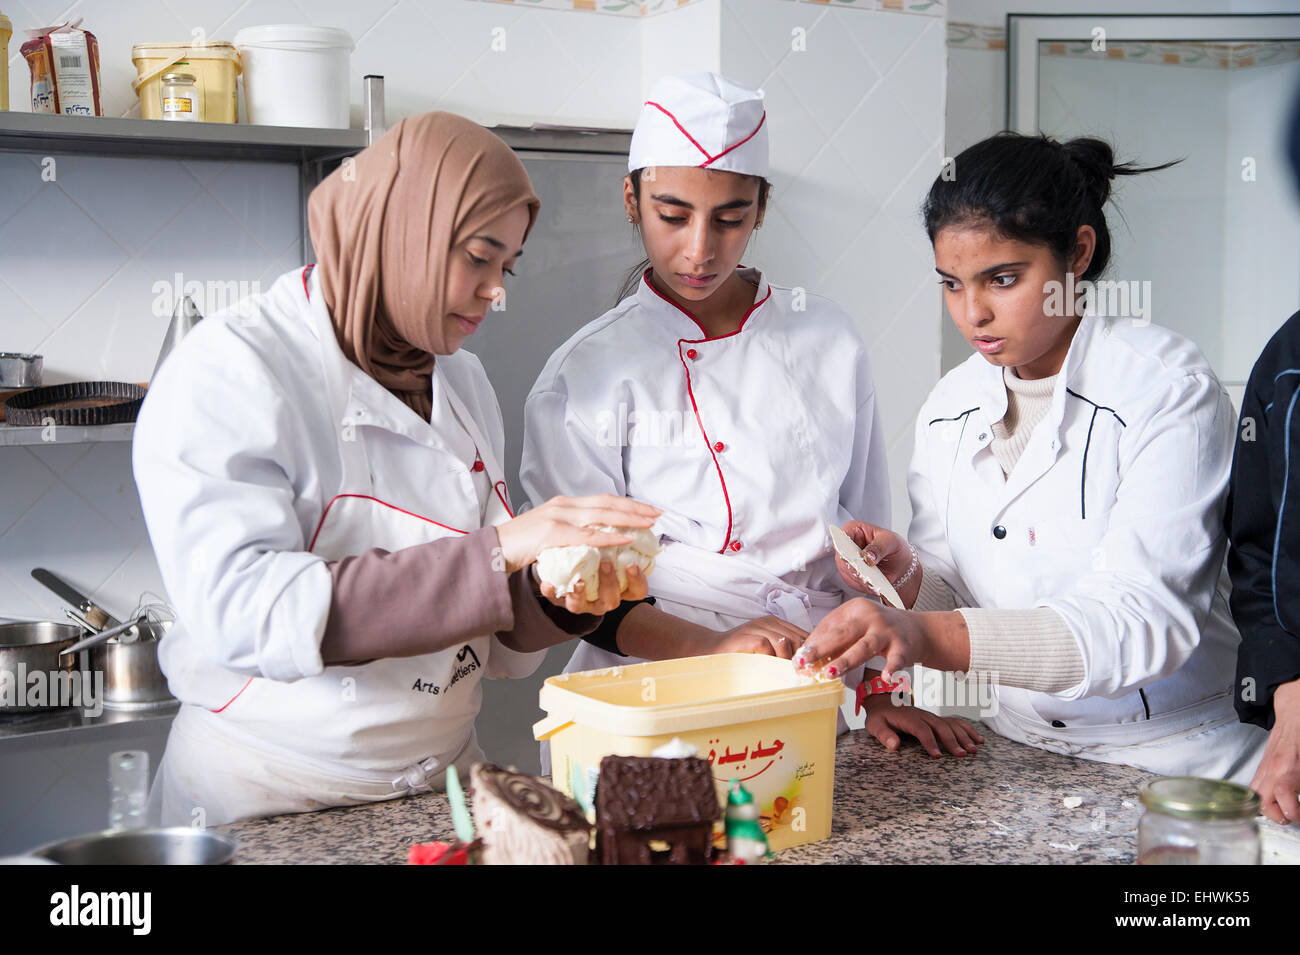 TUNISIA, TUNIS: Students at at Tunis' Tourism School learn cooking, baking, waitering and also have classroom lessons. Stock Photo